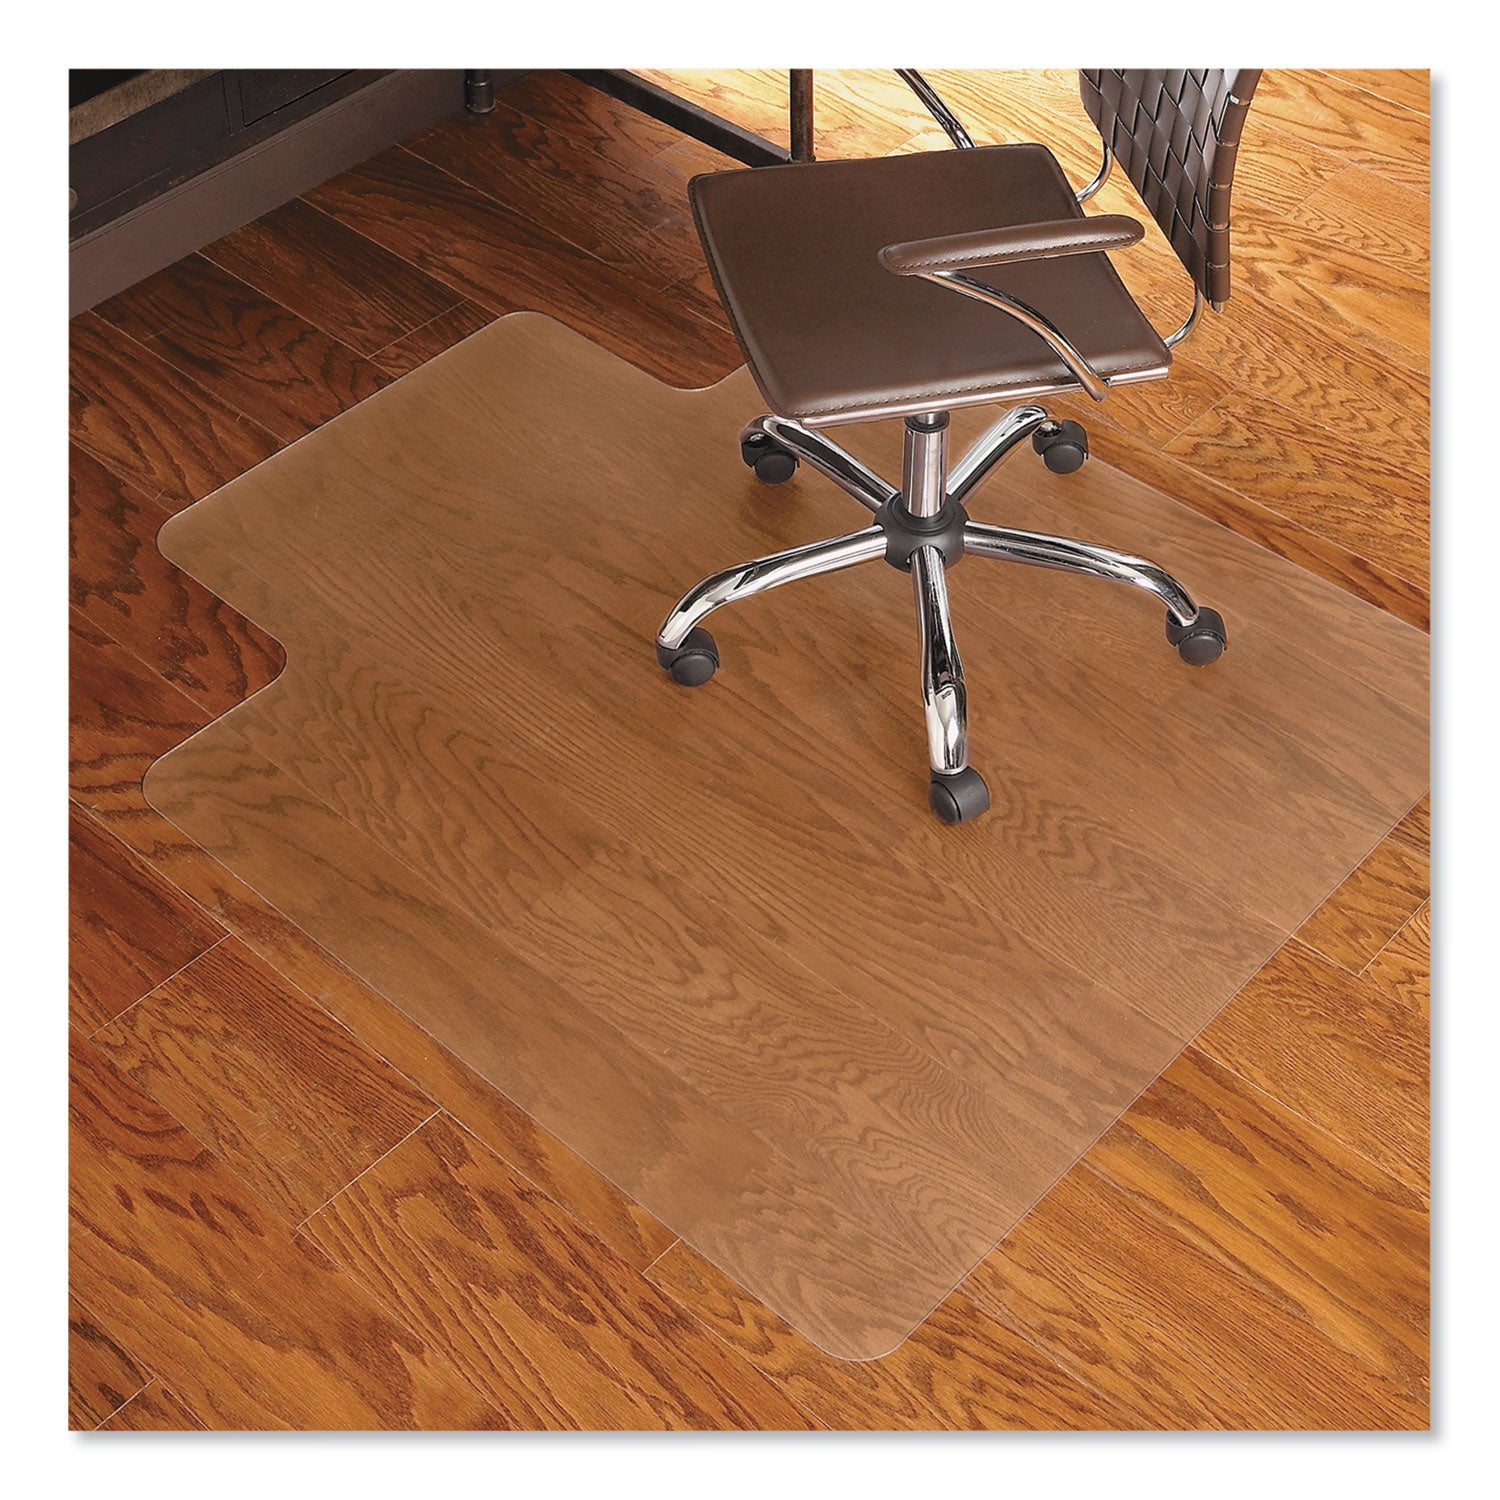 EverLife Chair Mat for Hard Floors, Light Use, Rectangular with Lip, 45 x 53, Clear - 